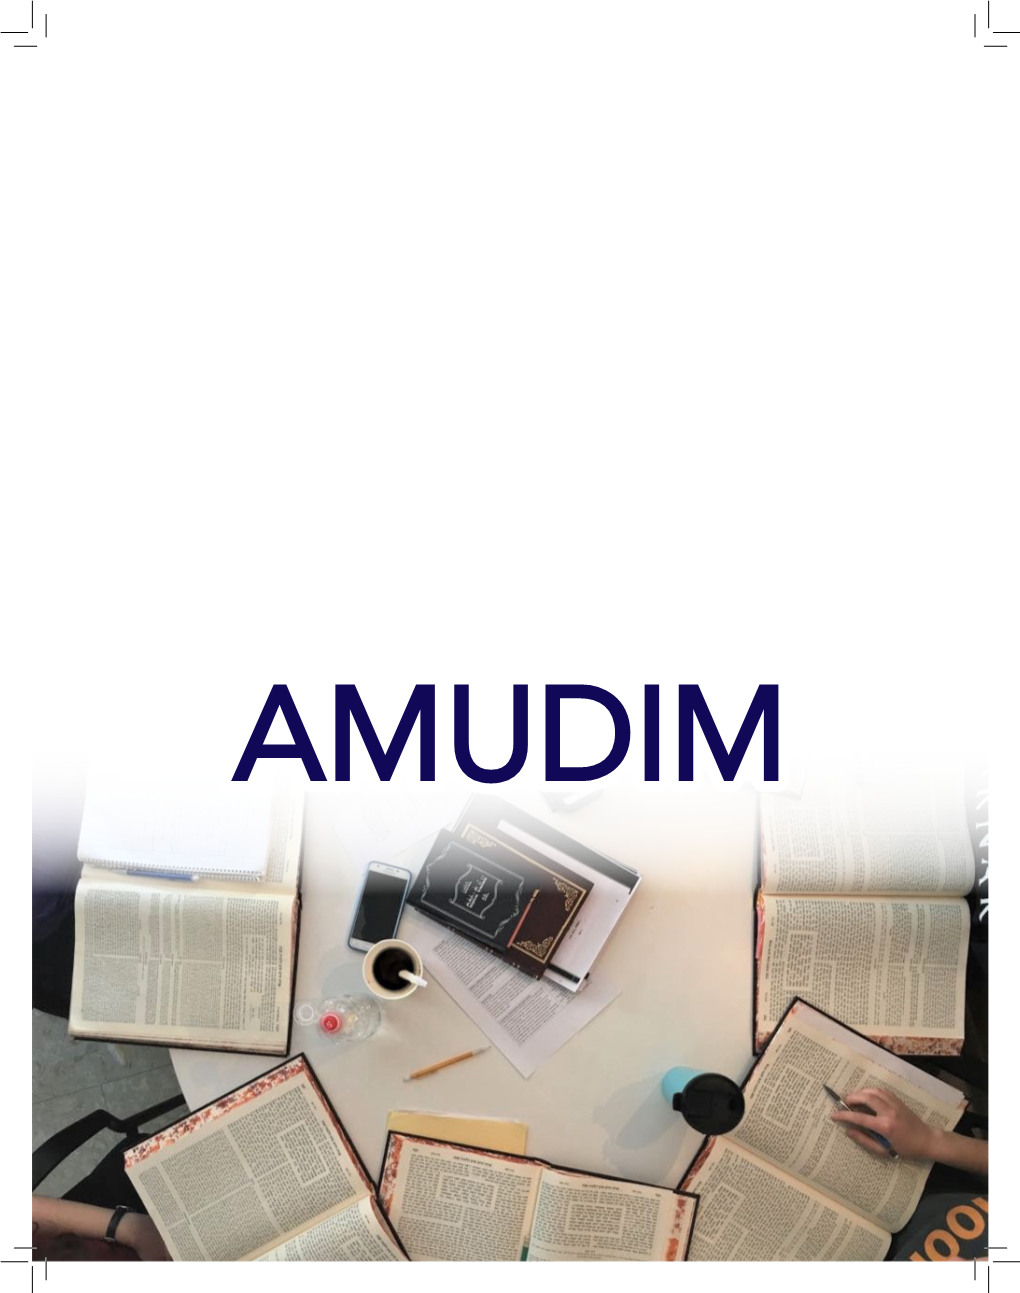 You Have 525,600 Minutes in Israel. How Will You Spend Them? Take 10 Minutes Now to Learn About Amudim Look Beyond the “What” to Explore the “Whys” and “Hows”